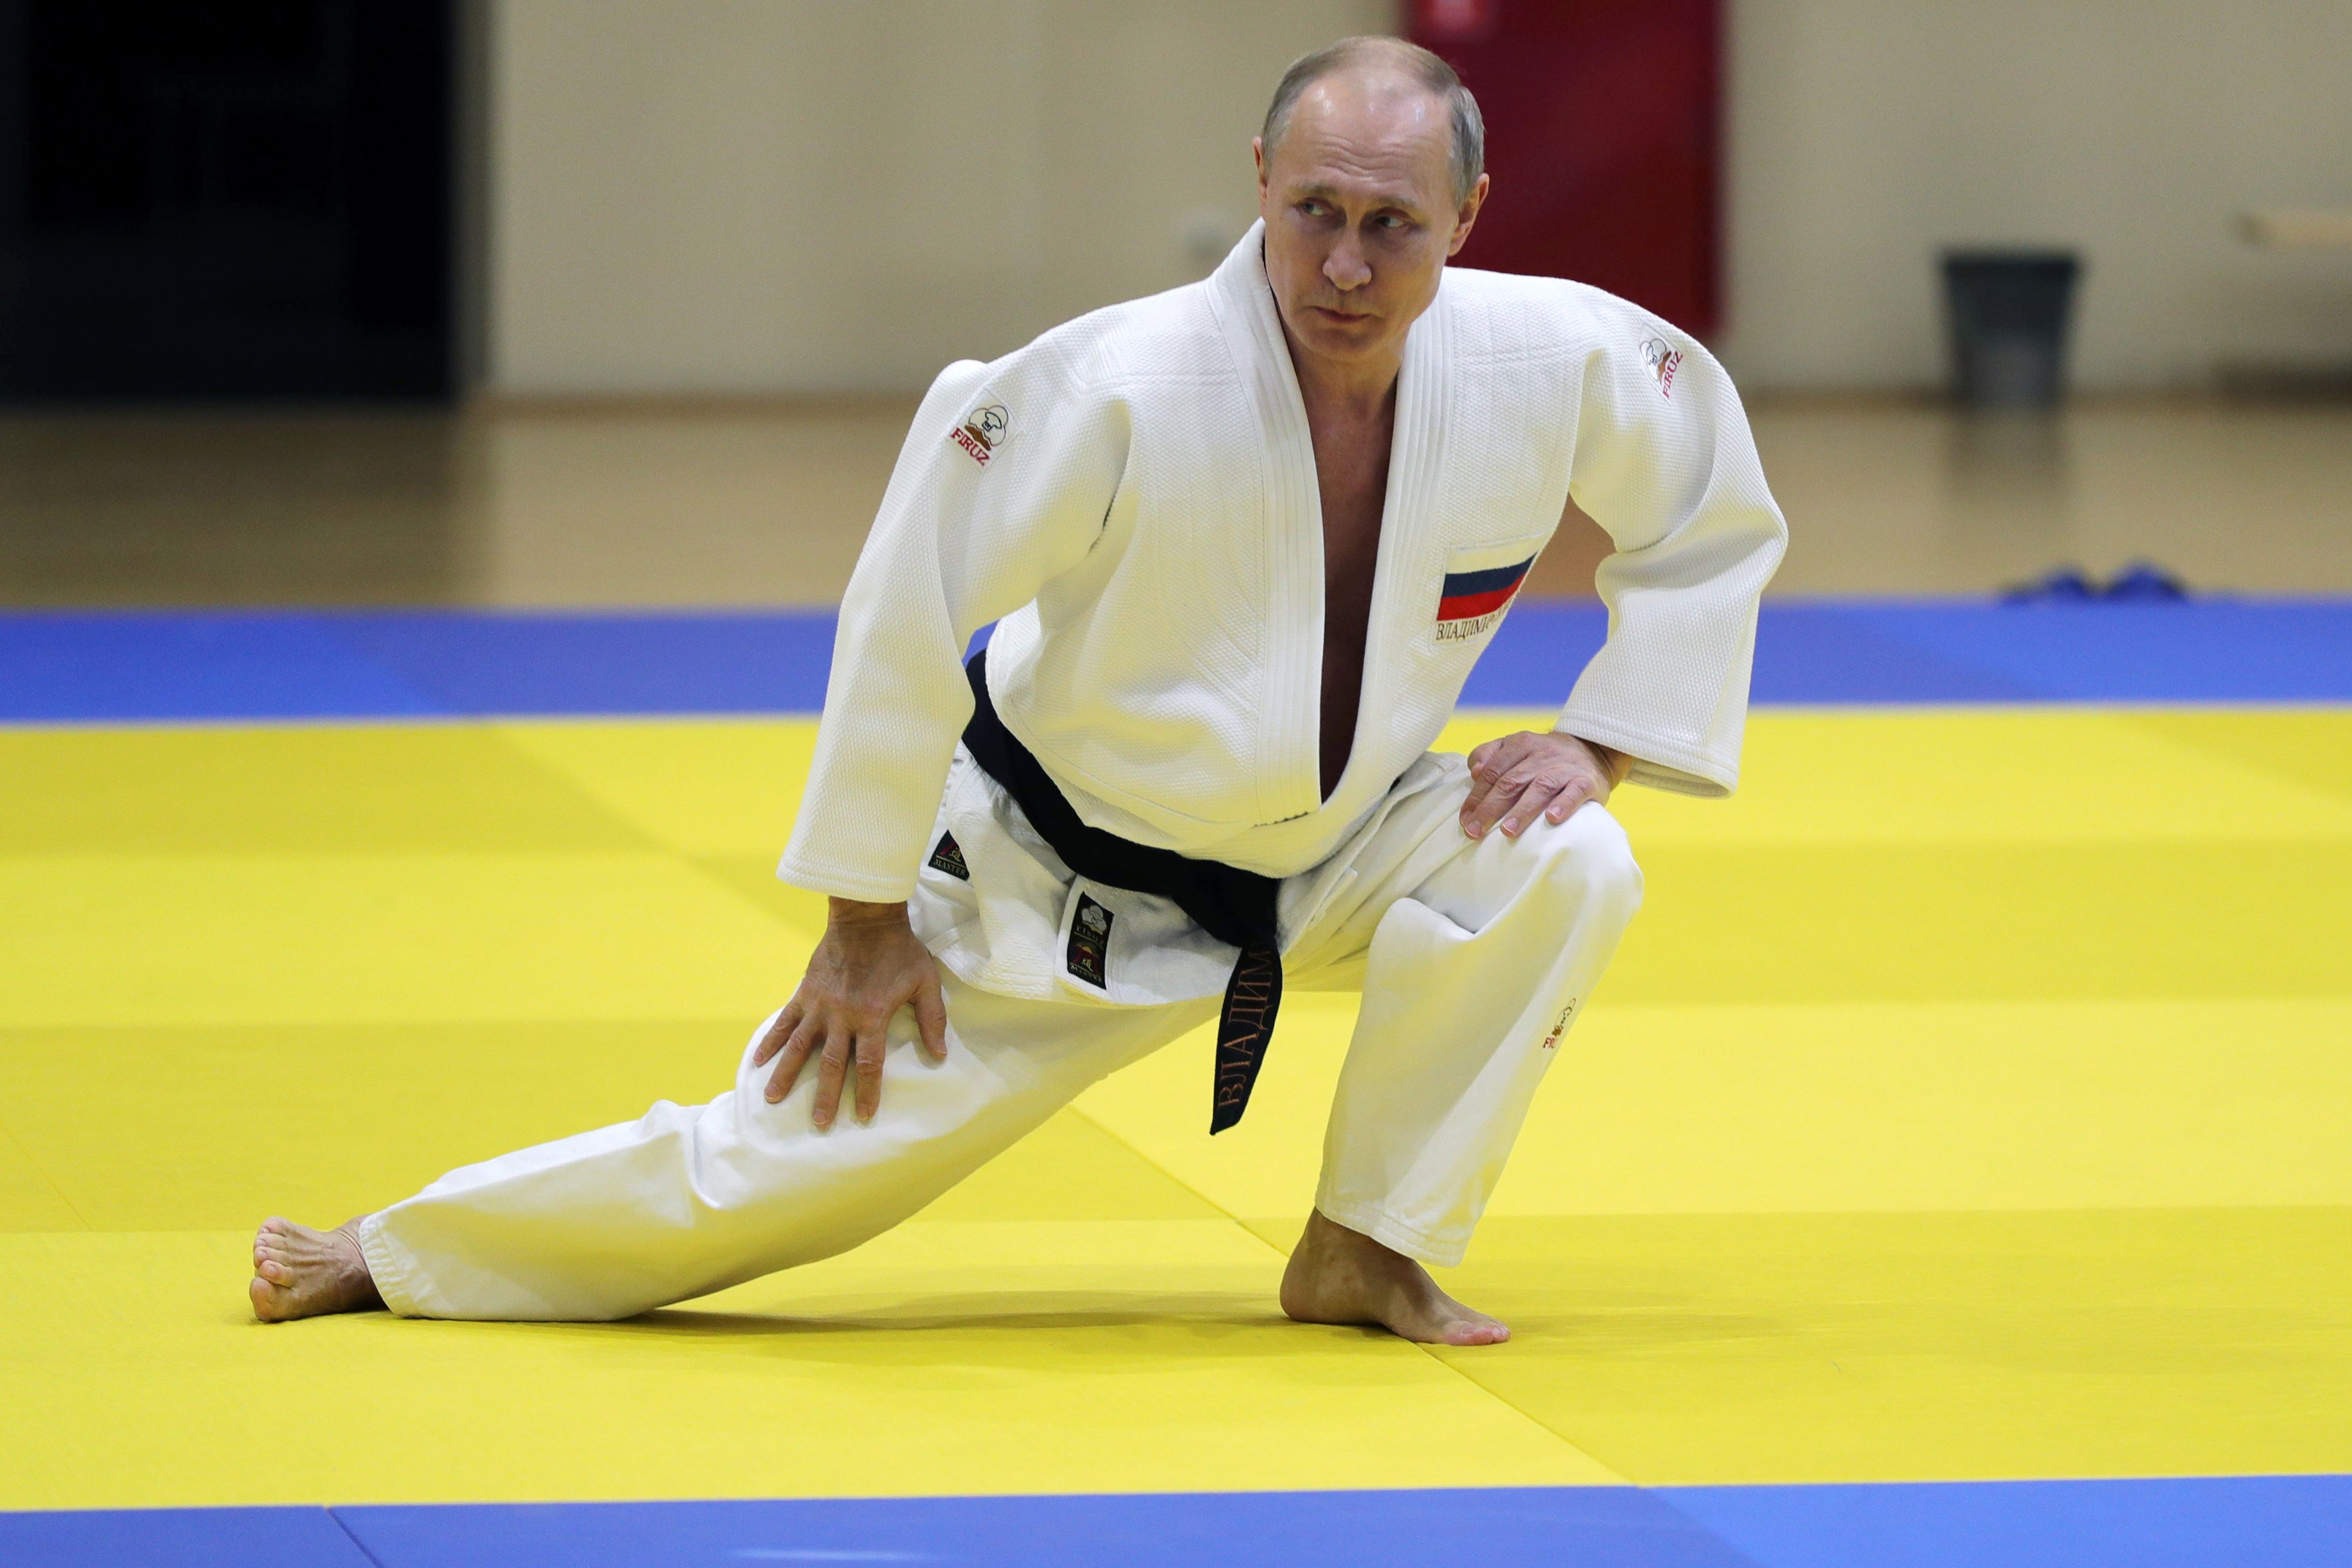 Putin taking part in training with Russia's national judo team in 2019